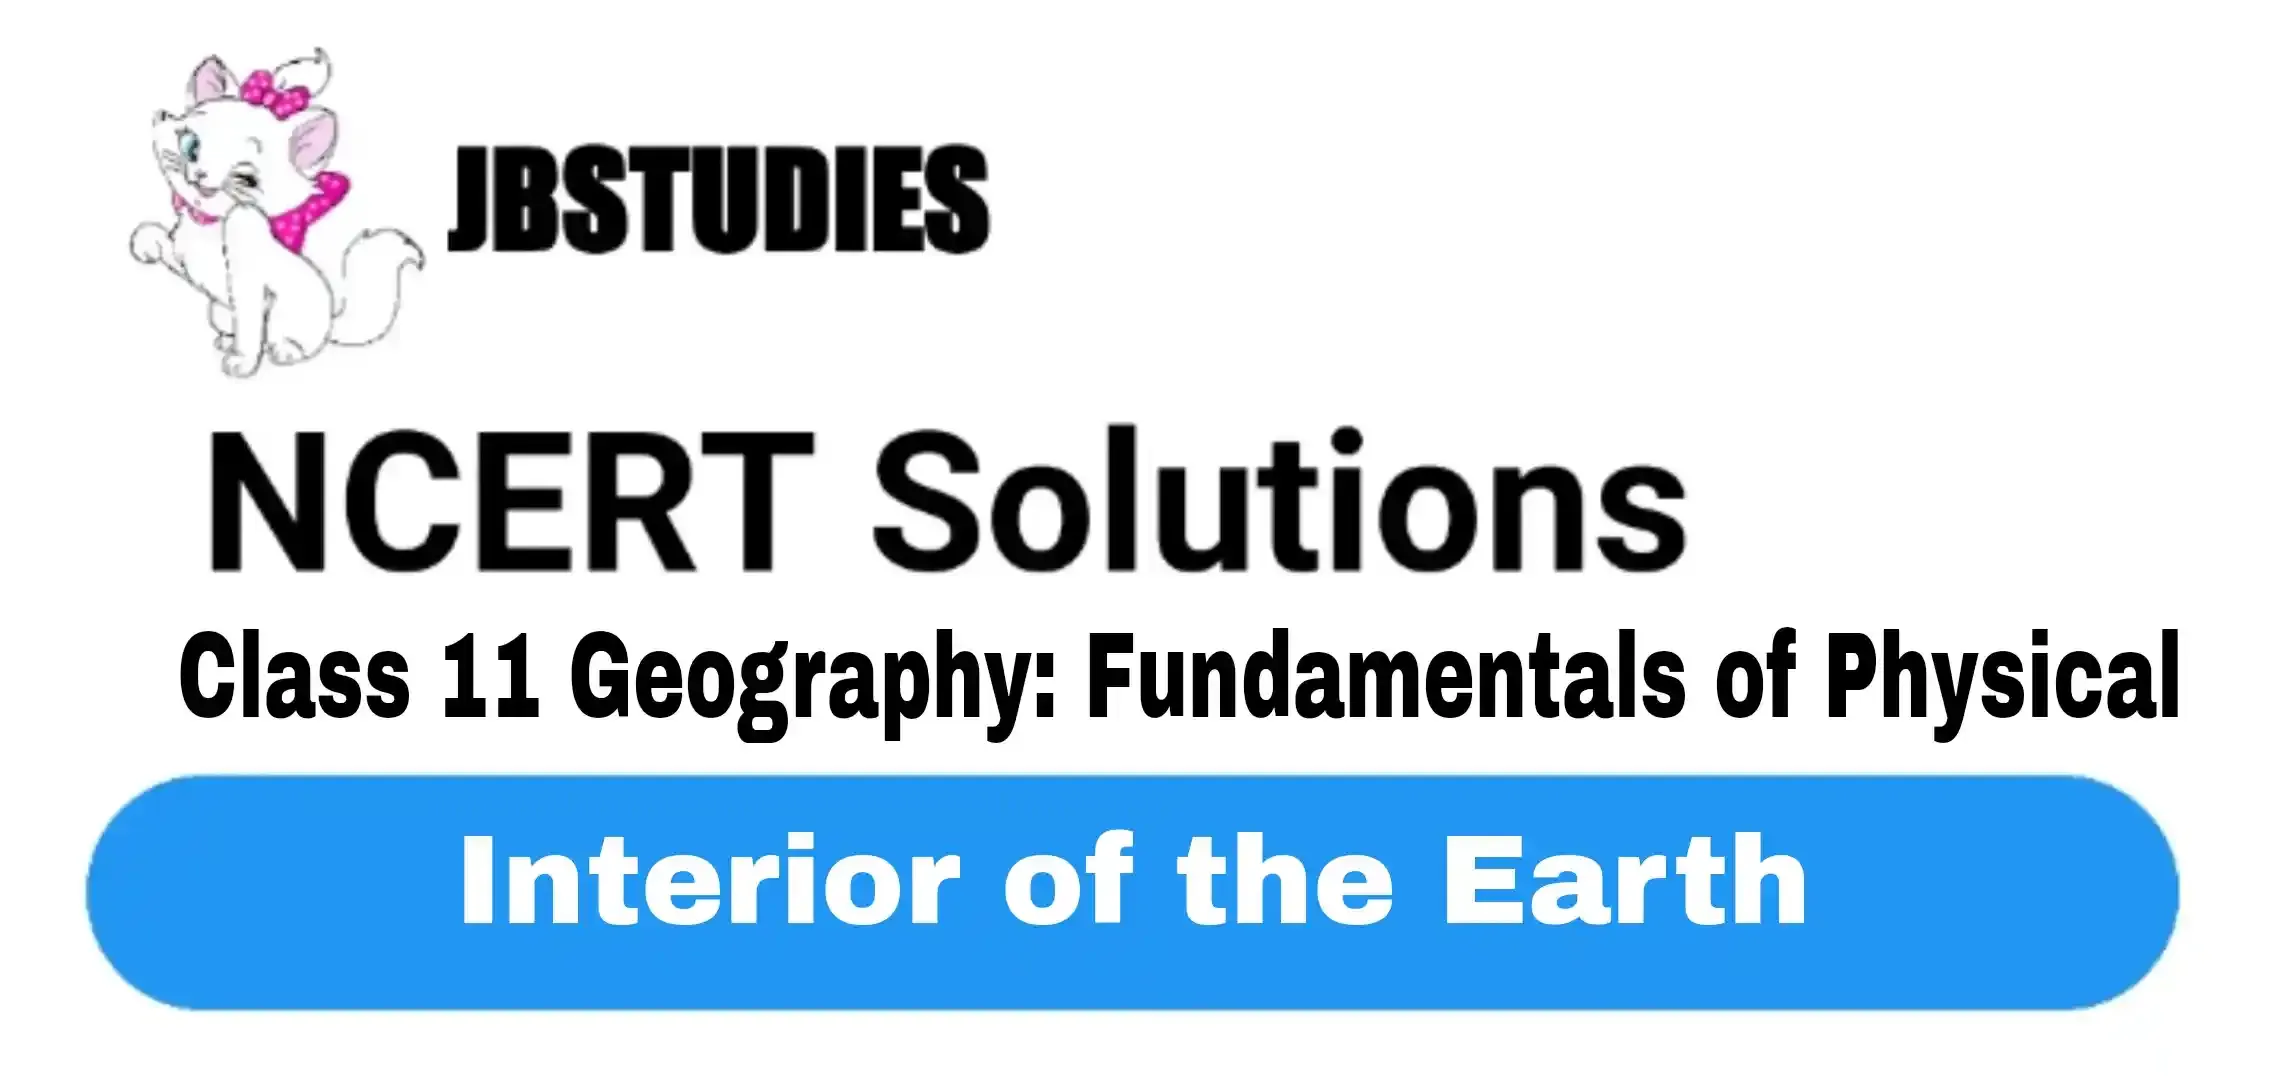 Solutions Class 11 Geography Chapter-3 Interior of the Earth